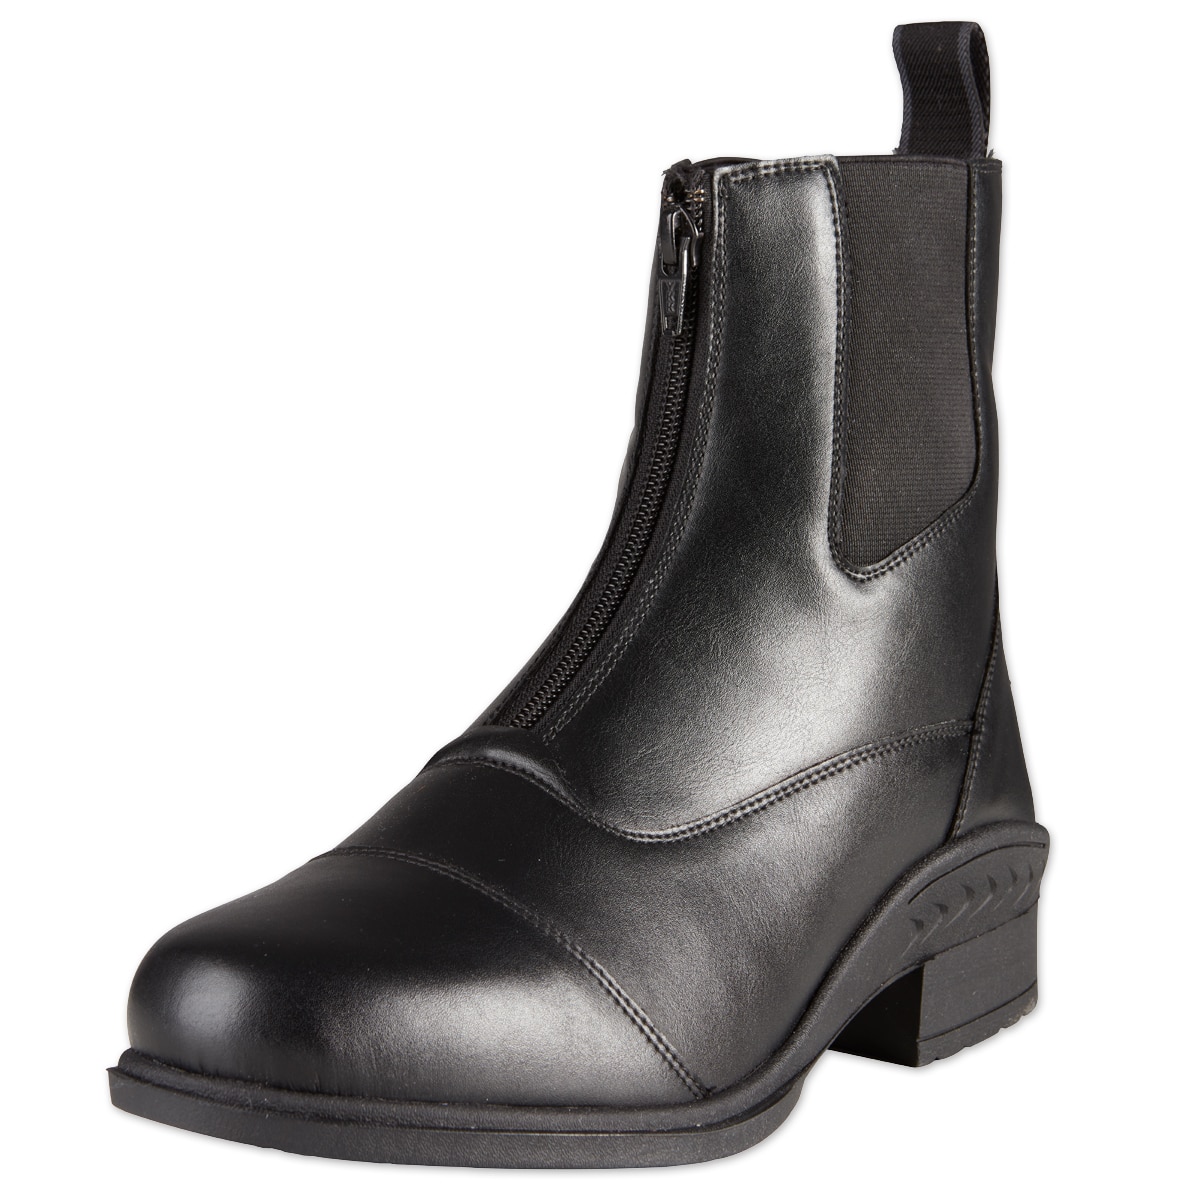 Ovation Quantum Zip Women's Paddock Riding Boots Synthetic Leather 